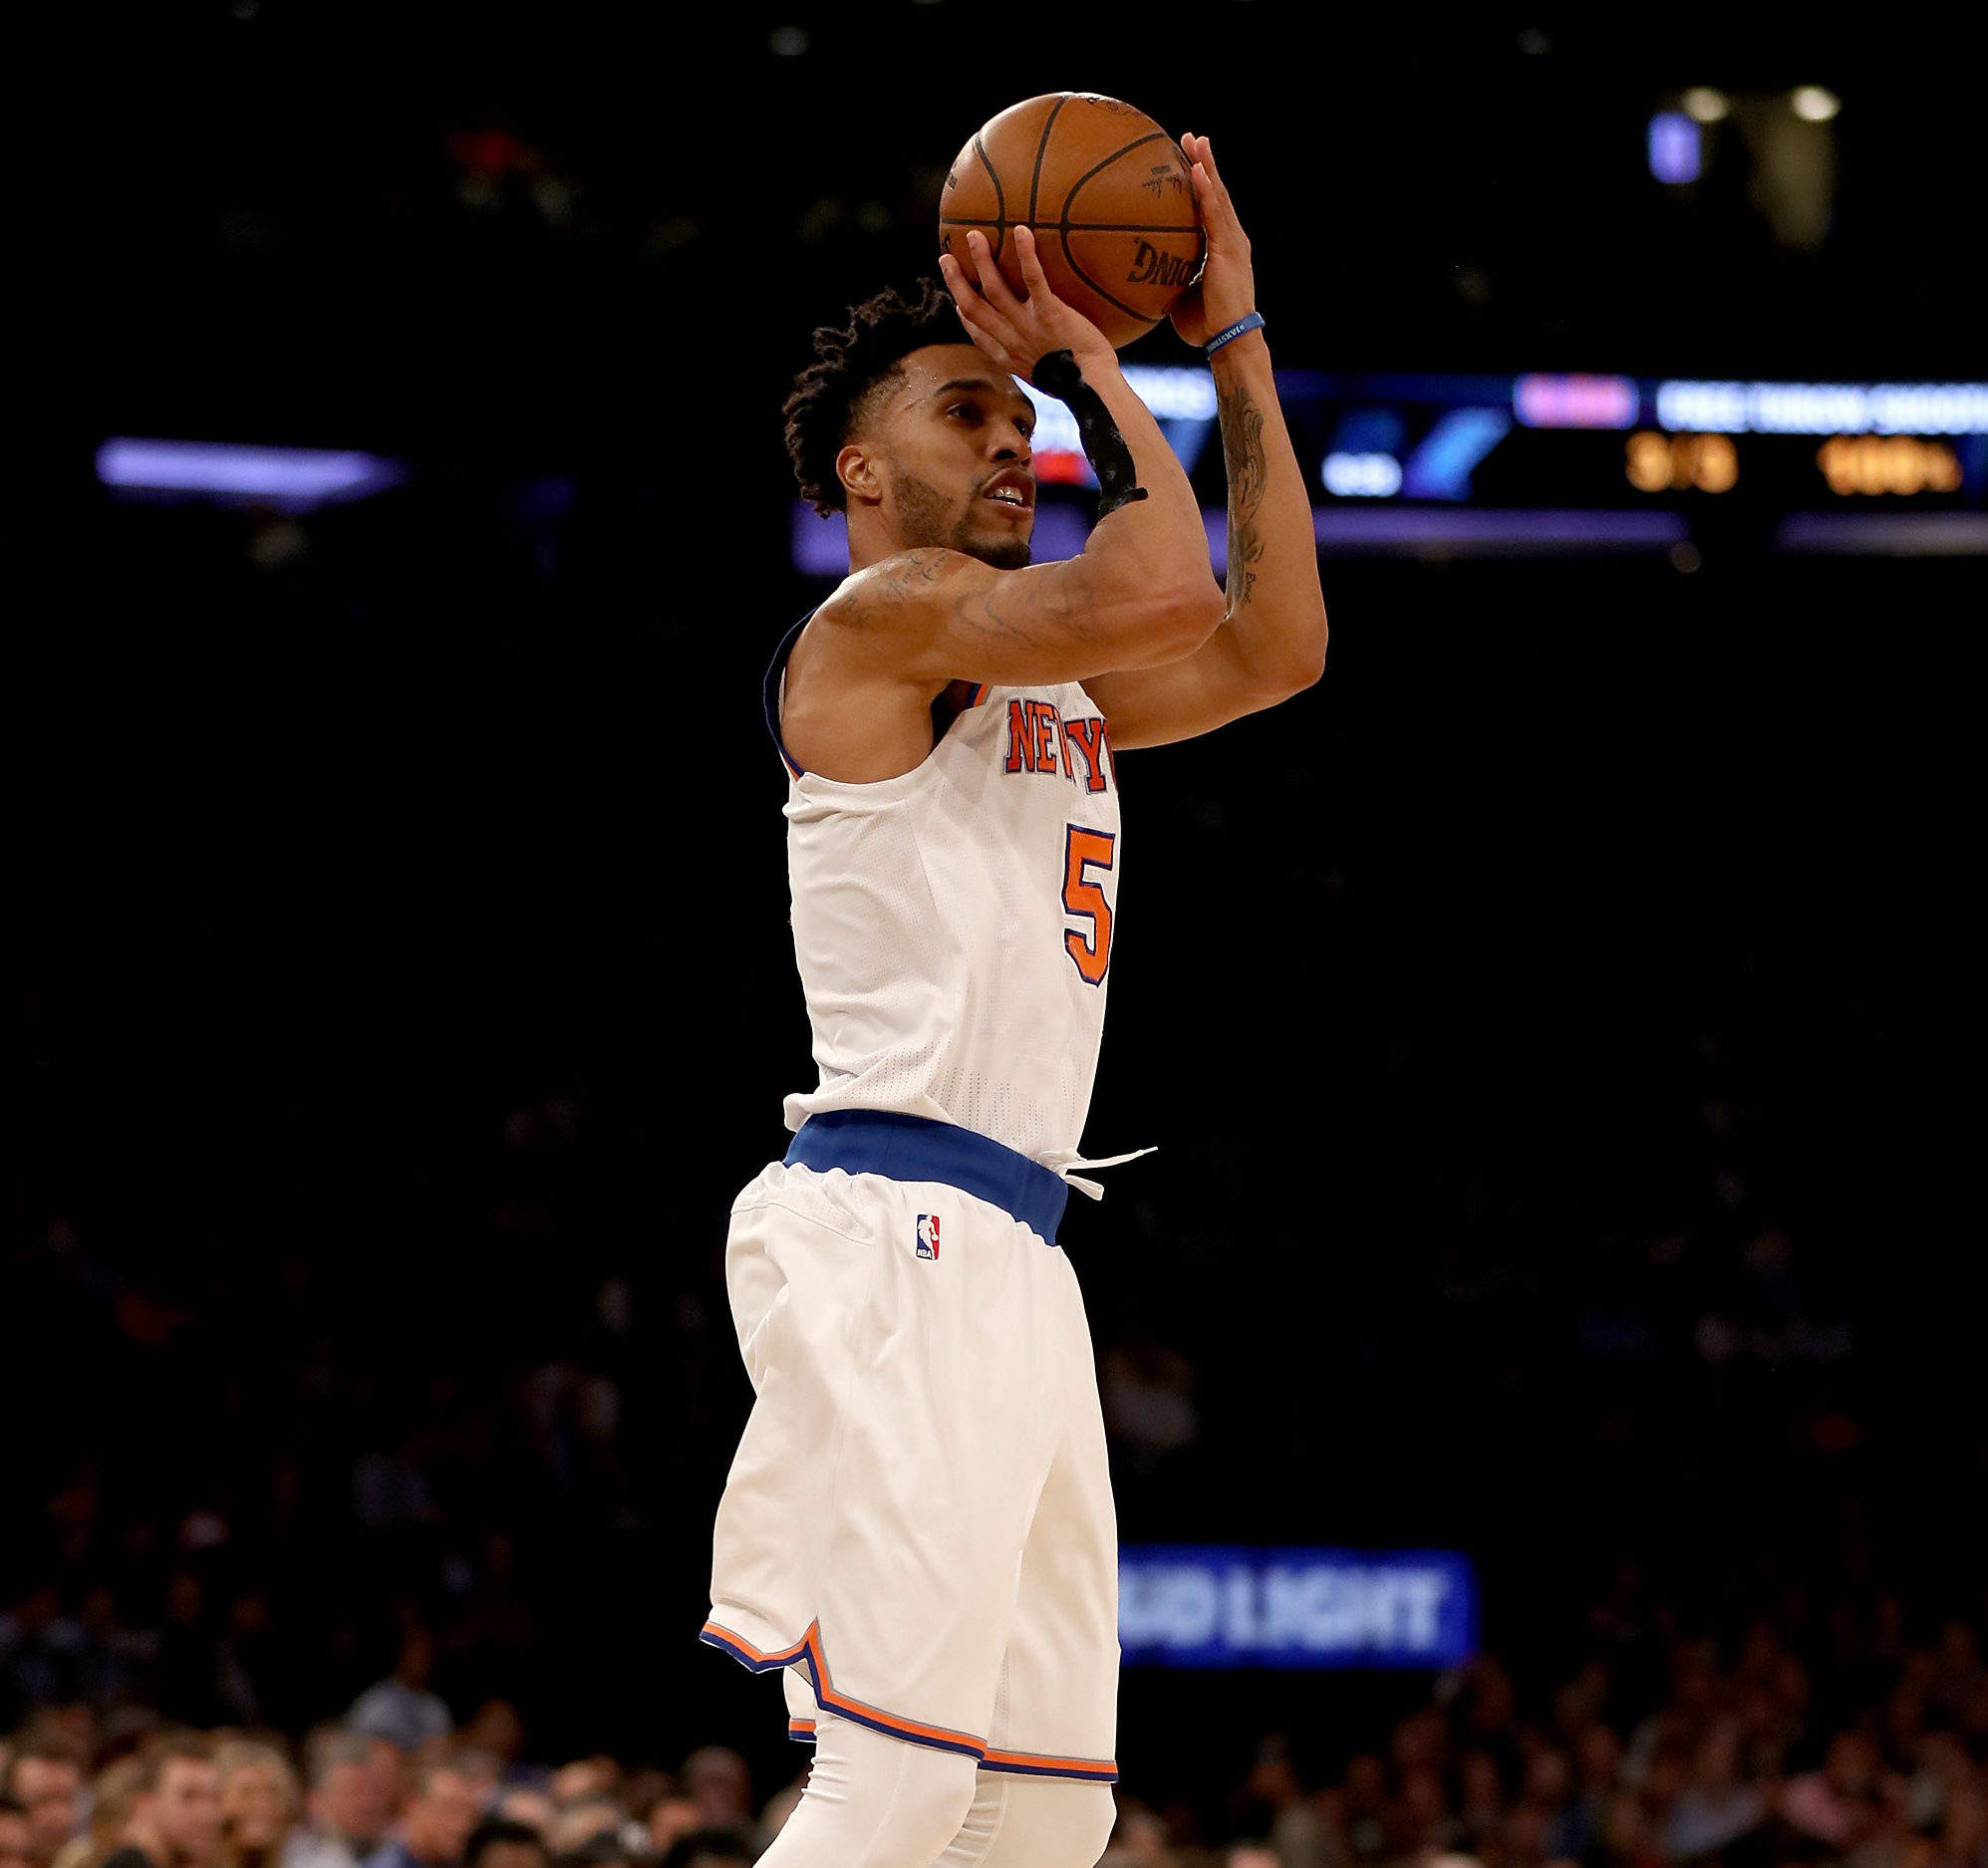 NEW YORK, NY - JANUARY 12: Courtney Lee #5 of the New York Knicks takes a three point shot in the first quarter against the Chicago Bulls at Madison Square Garden on January 12, 2017 in New York City. NOTE TO USER: User expressly acknowledges and agrees that, by downloading and or using this Photograph, user is consenting to the terms and conditions of the Getty Images License Agreement (Photo by Elsa/Getty Images)